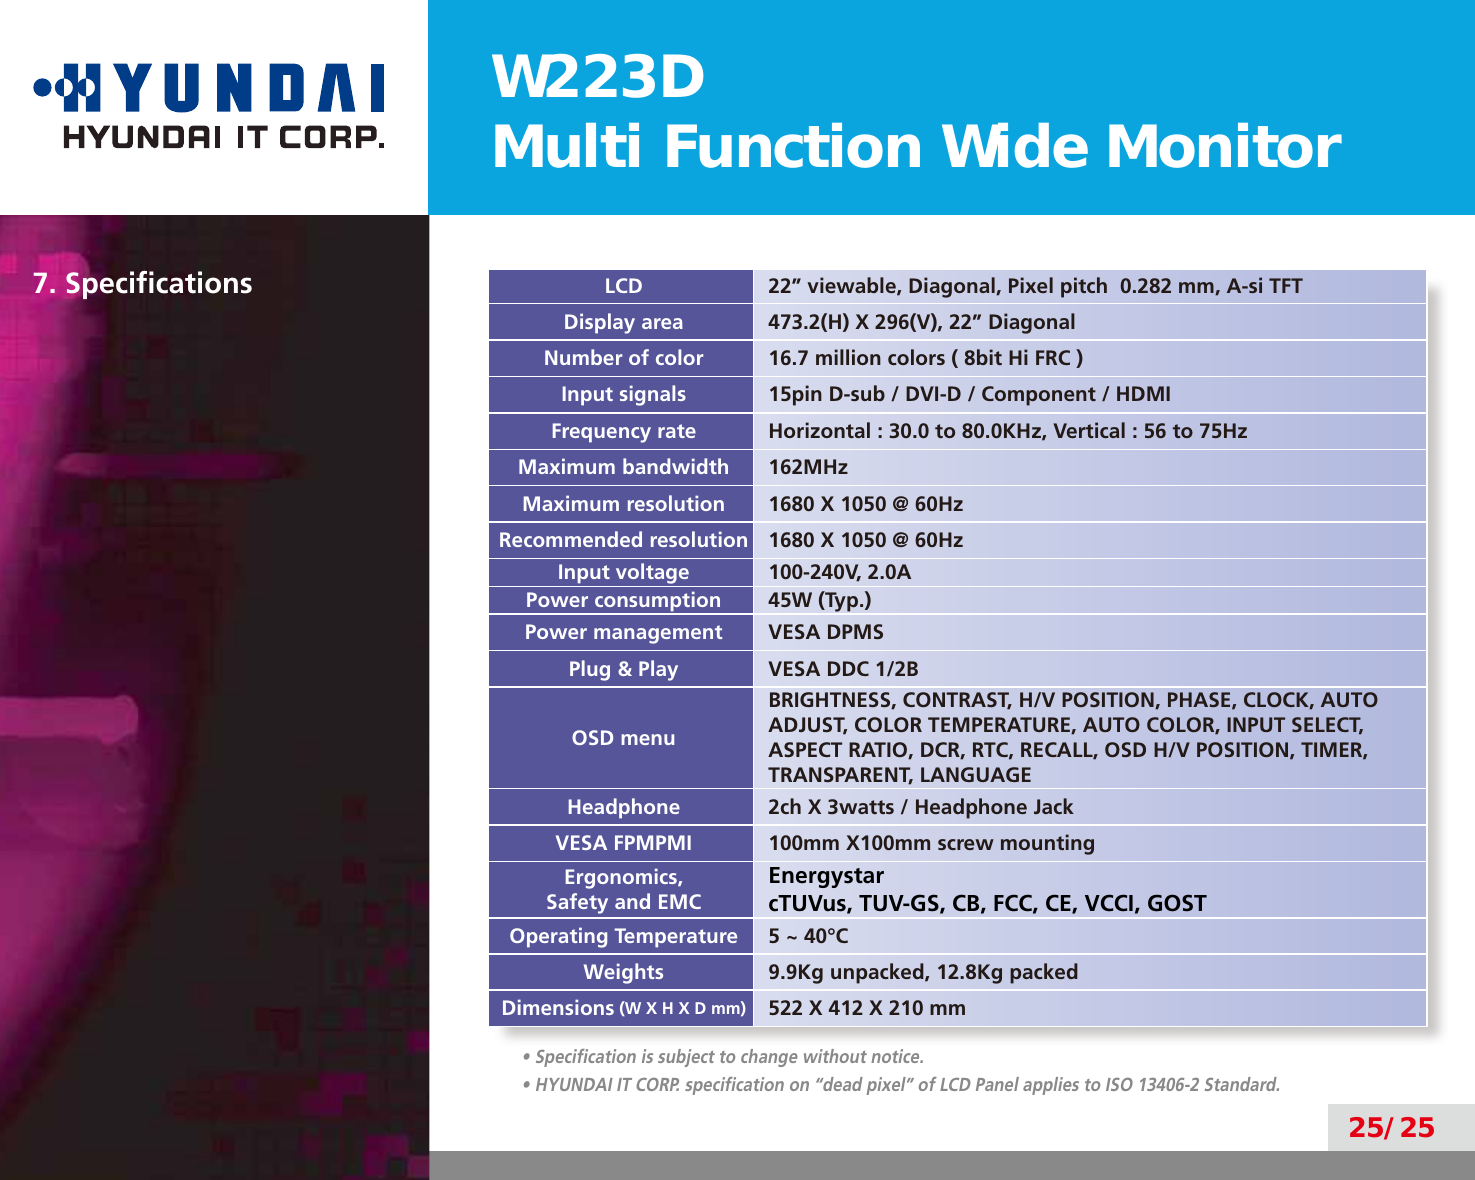 W223DMulti Function Wide Monitor25/257. Speciﬁcations LCD 22” viewable, Diagonal, Pixel pitch  0.282 mm, A-si TFTDisplay area 473.2(H) X 296(V), 22” DiagonalNumber of color 16.7 million colors ( 8bit Hi FRC )Input signals 15pin D-sub / DVI-D / Component / HDMIFrequency rate Horizontal : 30.0 to 80.0KHz, Vertical : 56 to 75HzMaximum bandwidth 162MHzMaximum resolution 1680 X 1050 @ 60HzRecommended resolution 1680 X 1050 @ 60HzInput voltage 100-240V, 2.0APower consumption 45W (Typ.)Power management VESA DPMSPlug &amp; Play VESA DDC 1/2BOSD menuBRIGHTNESS, CONTRAST, H/V POSITION, PHASE, CLOCK, AUTO ADJUST, COLOR TEMPERATURE, AUTO COLOR, INPUT SELECT, ASPECT RATIO, DCR, RTC, RECALL, OSD H/V POSITION, TIMER, TRANSPARENT, LANGUAGEHeadphone 2ch X 3watts / Headphone JackVESA FPMPMI 100mm X100mm screw mountingErgonomics,Safety and EMCEnergystar cTUVus, TUV-GS, CB, FCC, CE, VCCI, GOSTOperating Temperature 5 ~ 40°CWeights 9.9Kg unpacked, 12.8Kg packedDimensions (W X H X D mm) 522 X 412 X 210 mm• Speciﬁcation is subject to change without notice.• HYUNDAI IT CORP. speciﬁcation on “dead pixel” of LCD Panel applies to ISO 13406-2 Standard.